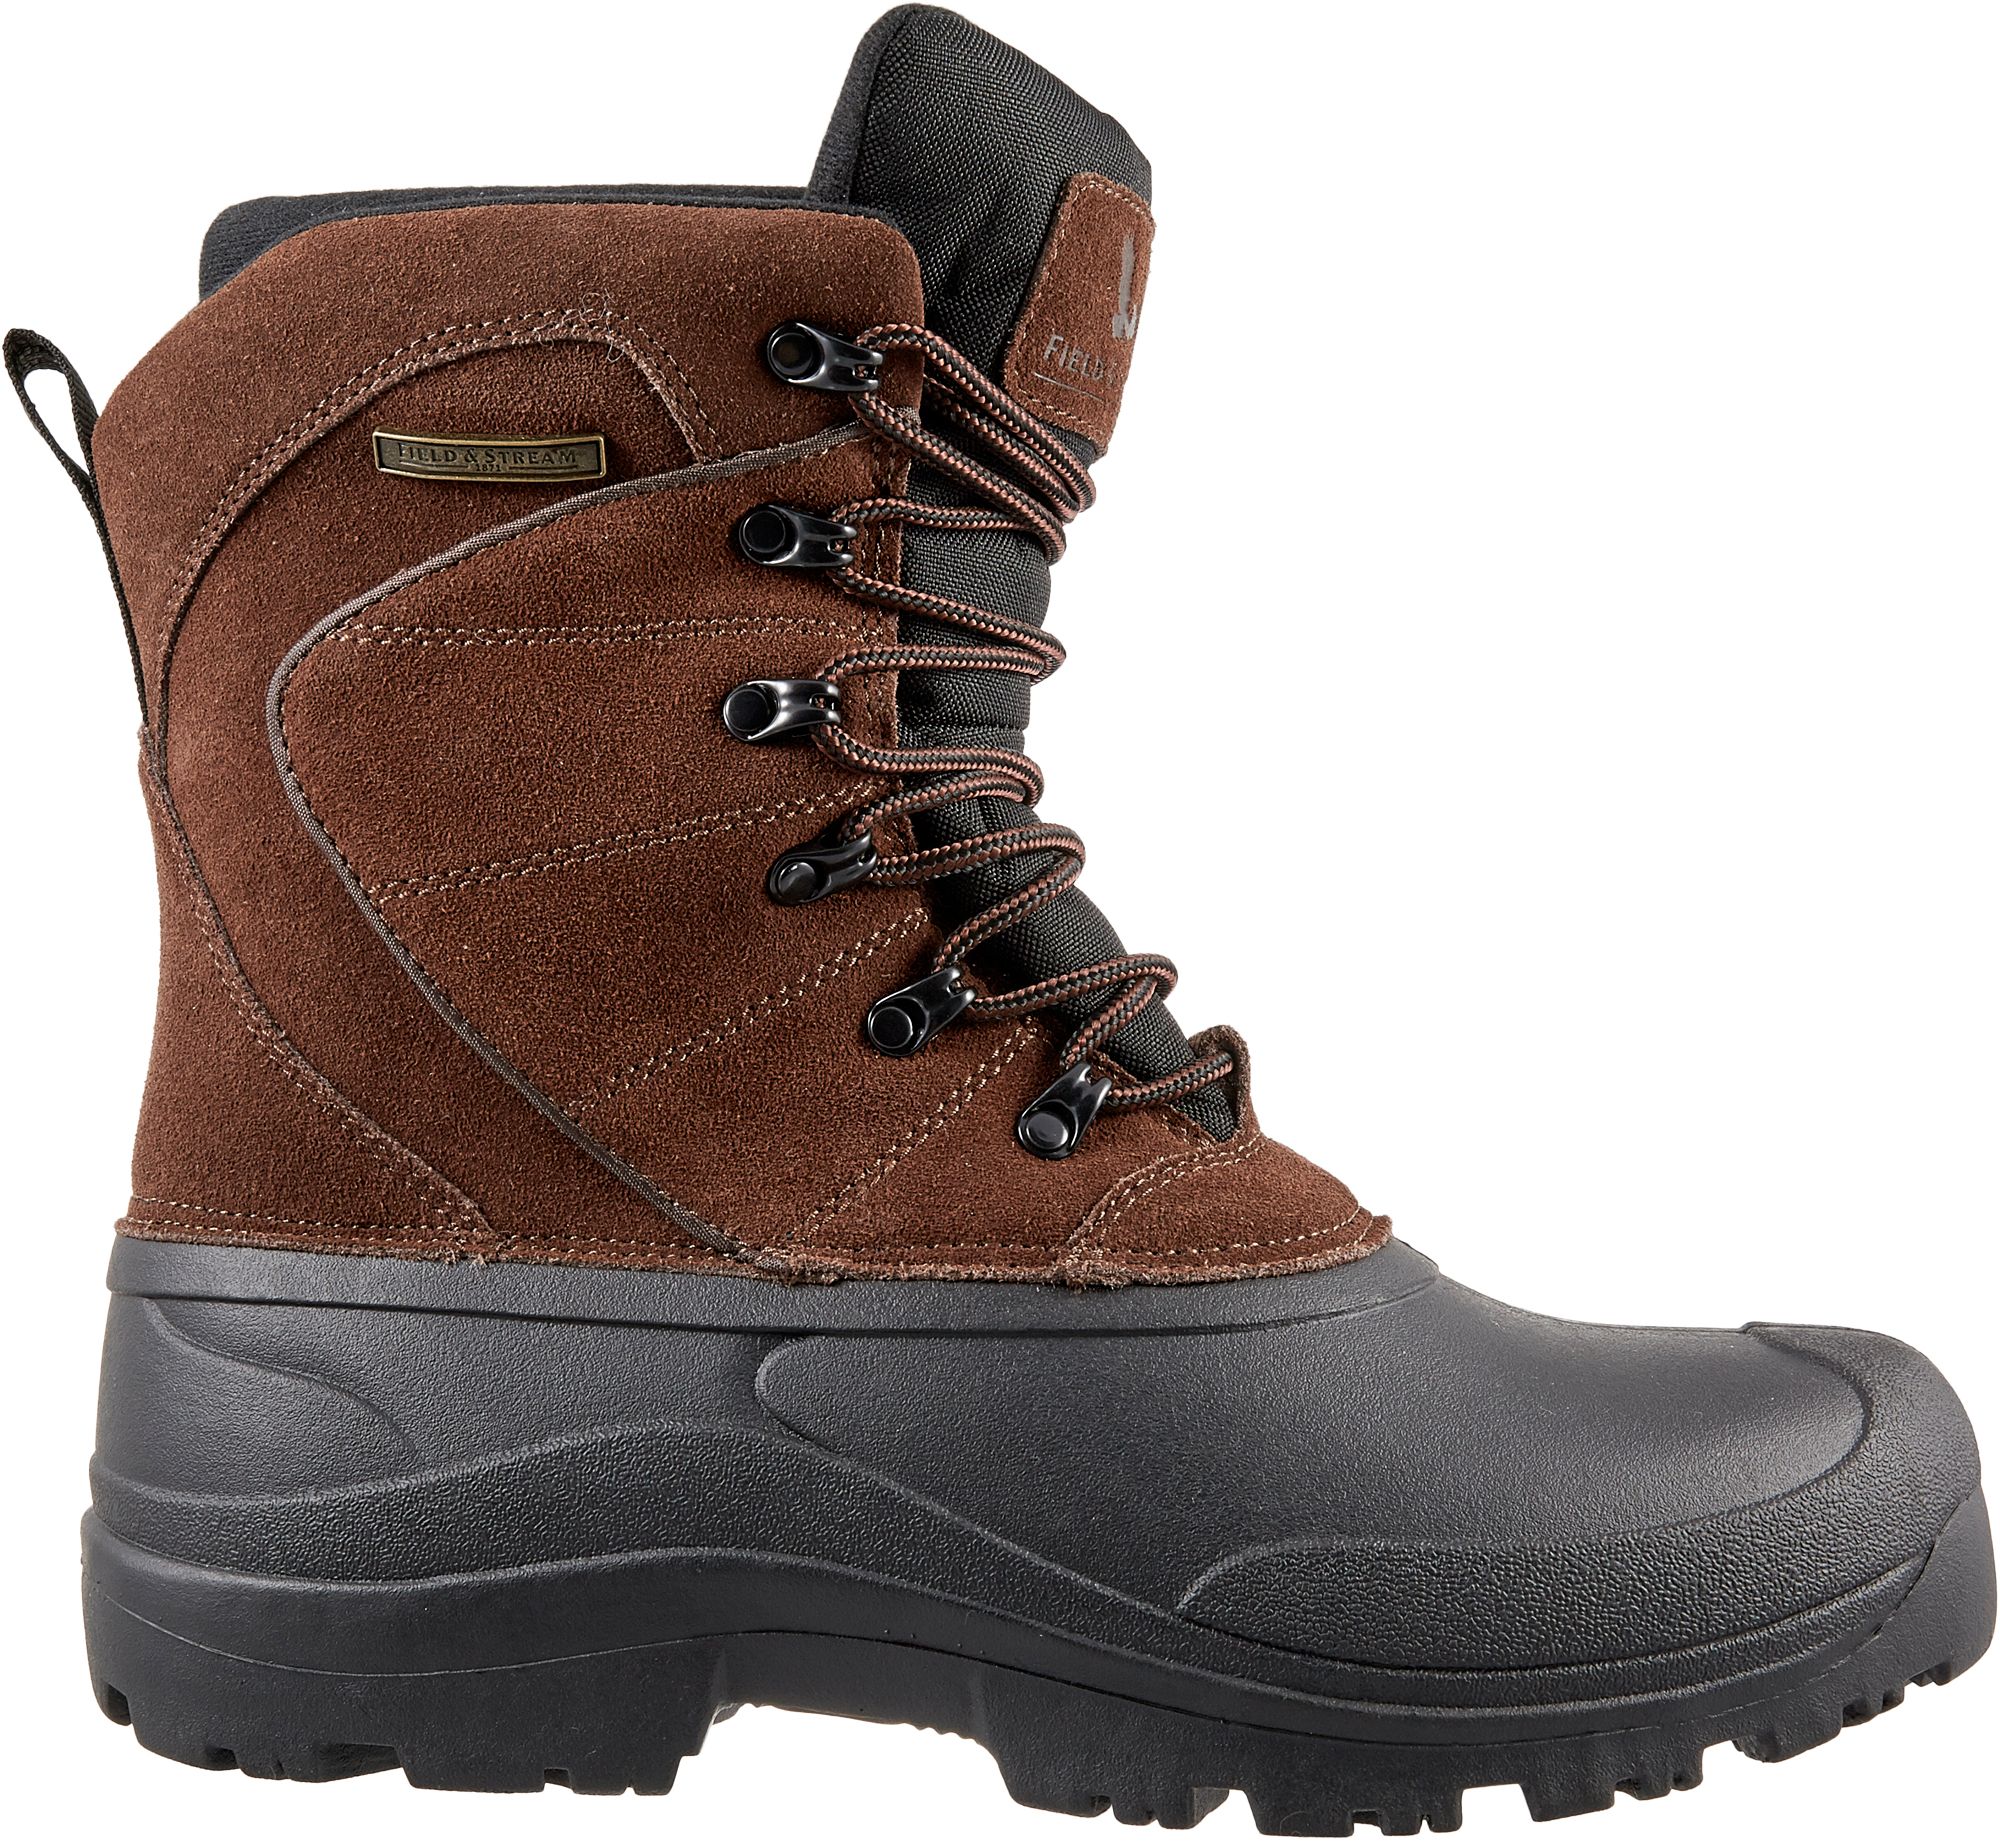 400g insulated winter boots